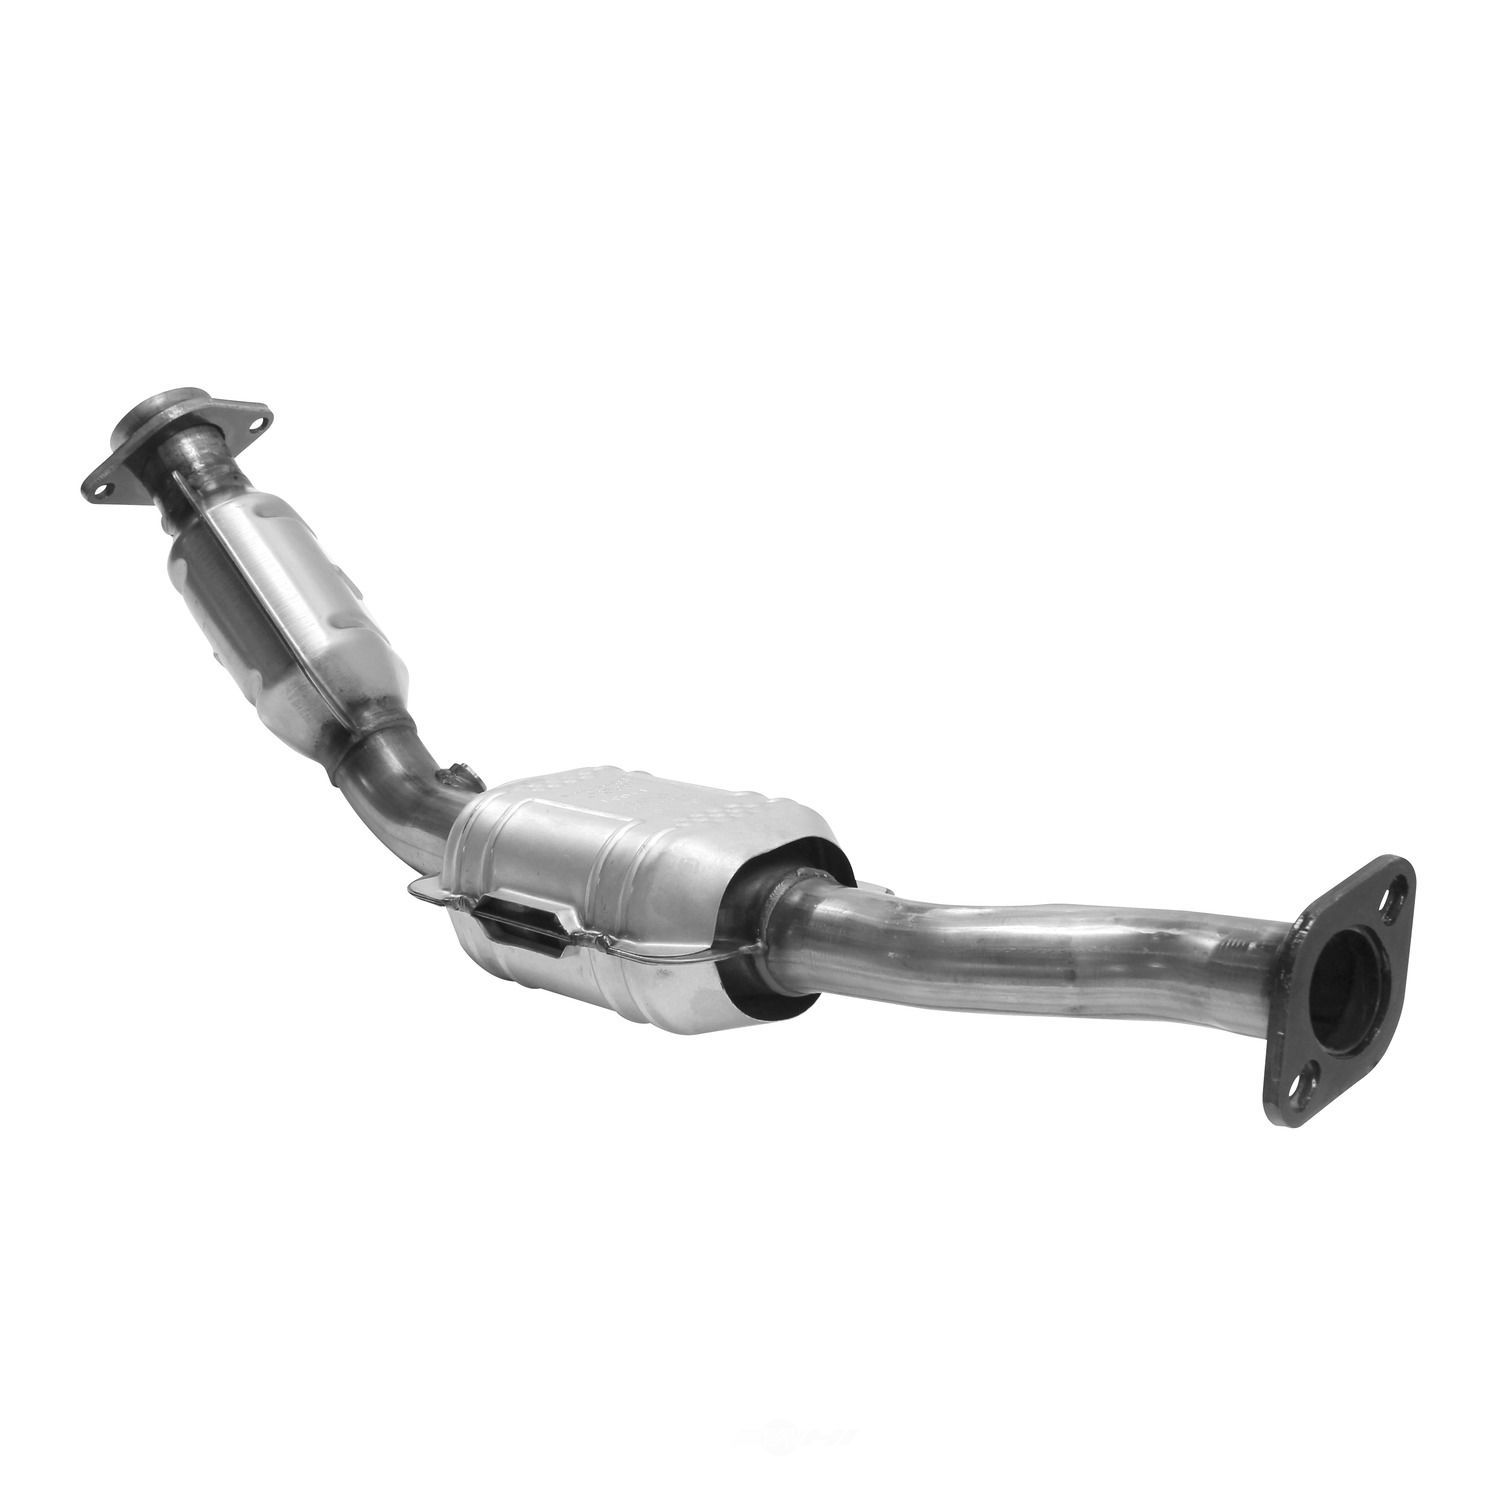 AP EXHAUST W/FEDERAL CONVERTER - Direct Fit Converter - APF 642179